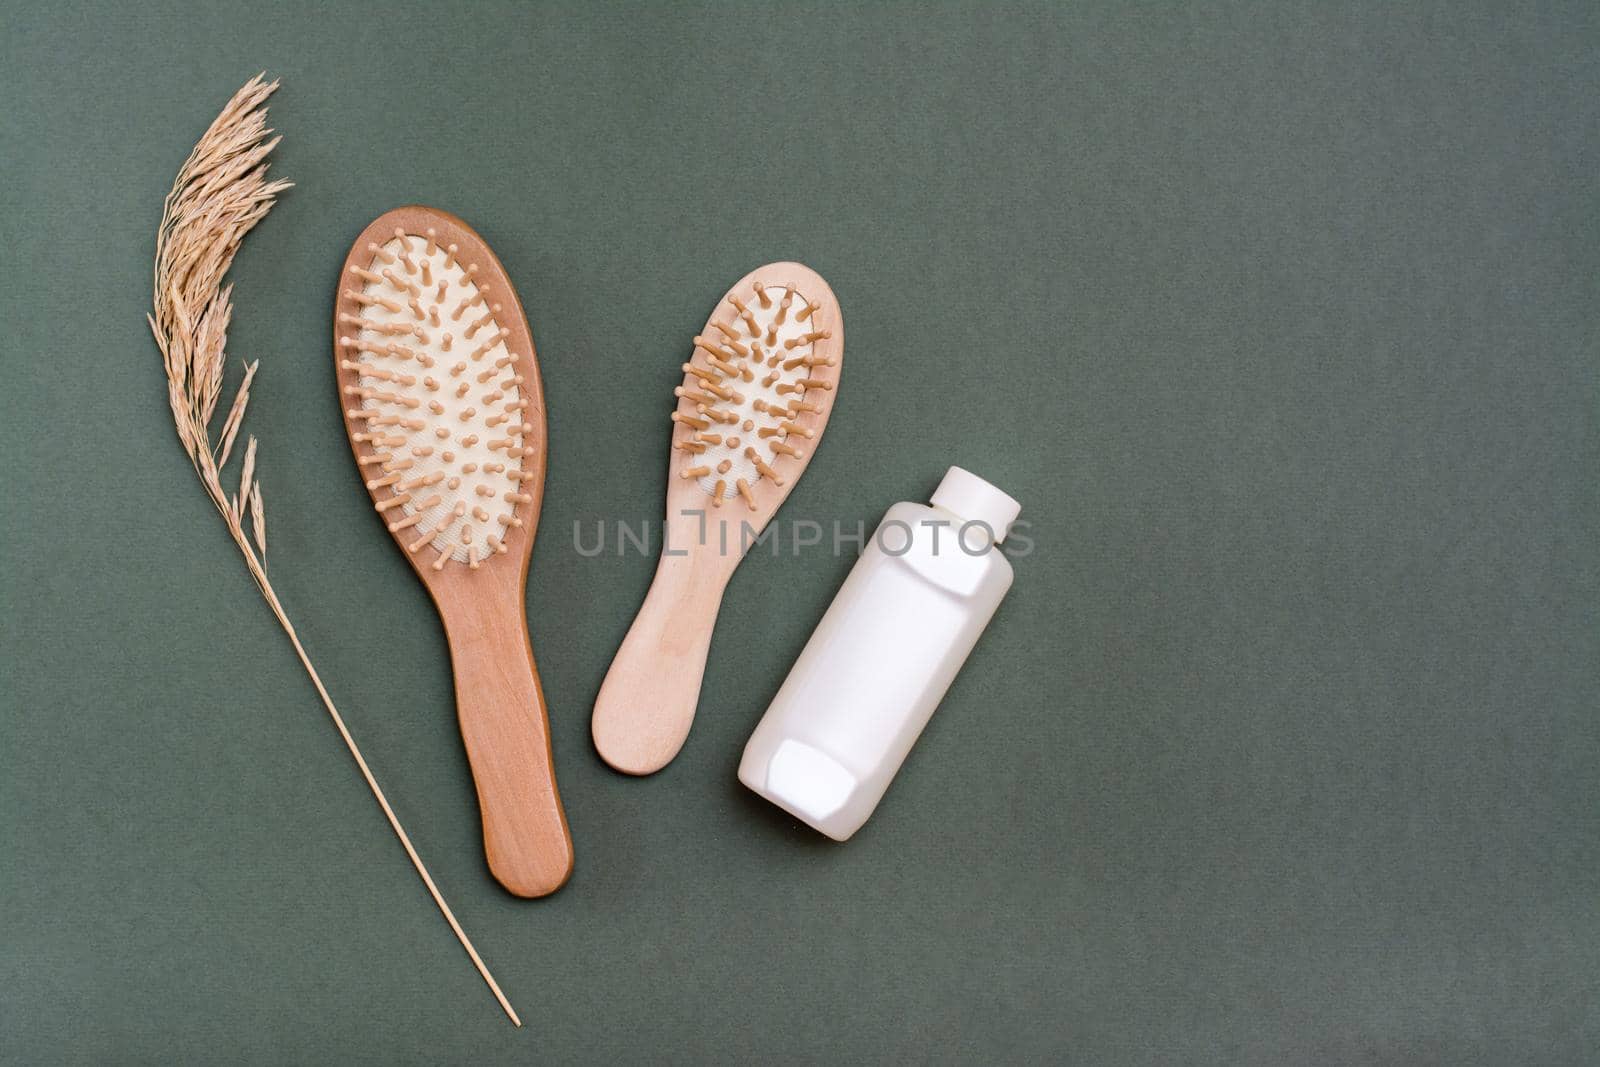 Hair care. Two wooden combs, a bottle of shampoo and ears of herbs on a green background. by Aleruana